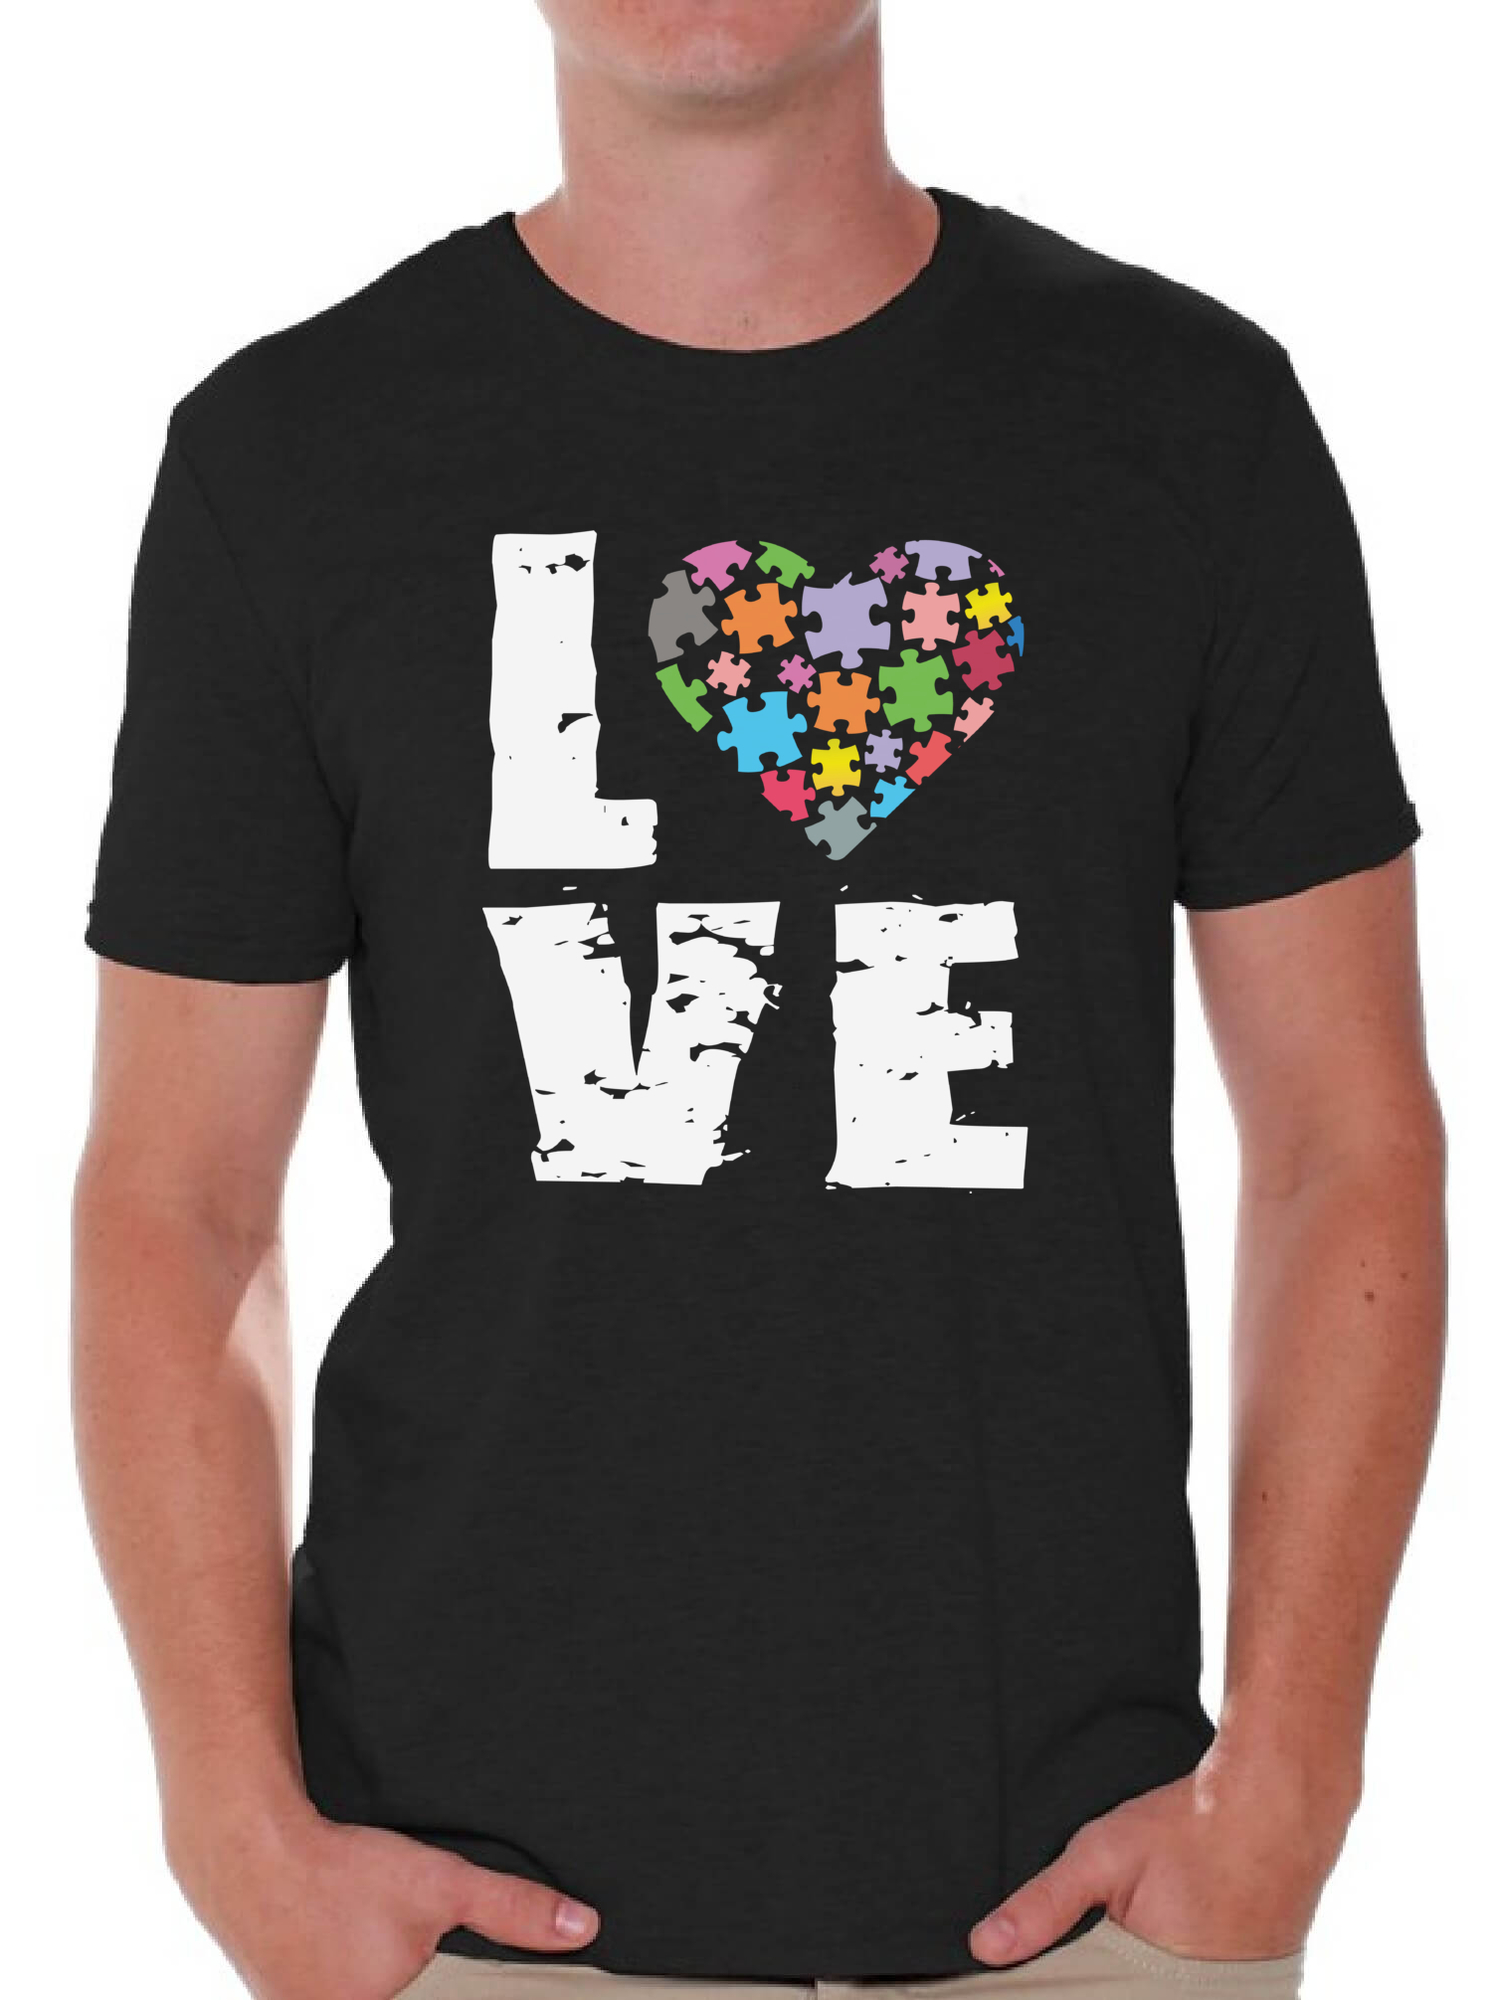 Awkward Styles Men's Love Puzzles Autism Awareness Graphic T-shirt Tops Autistic Support - image 1 of 4